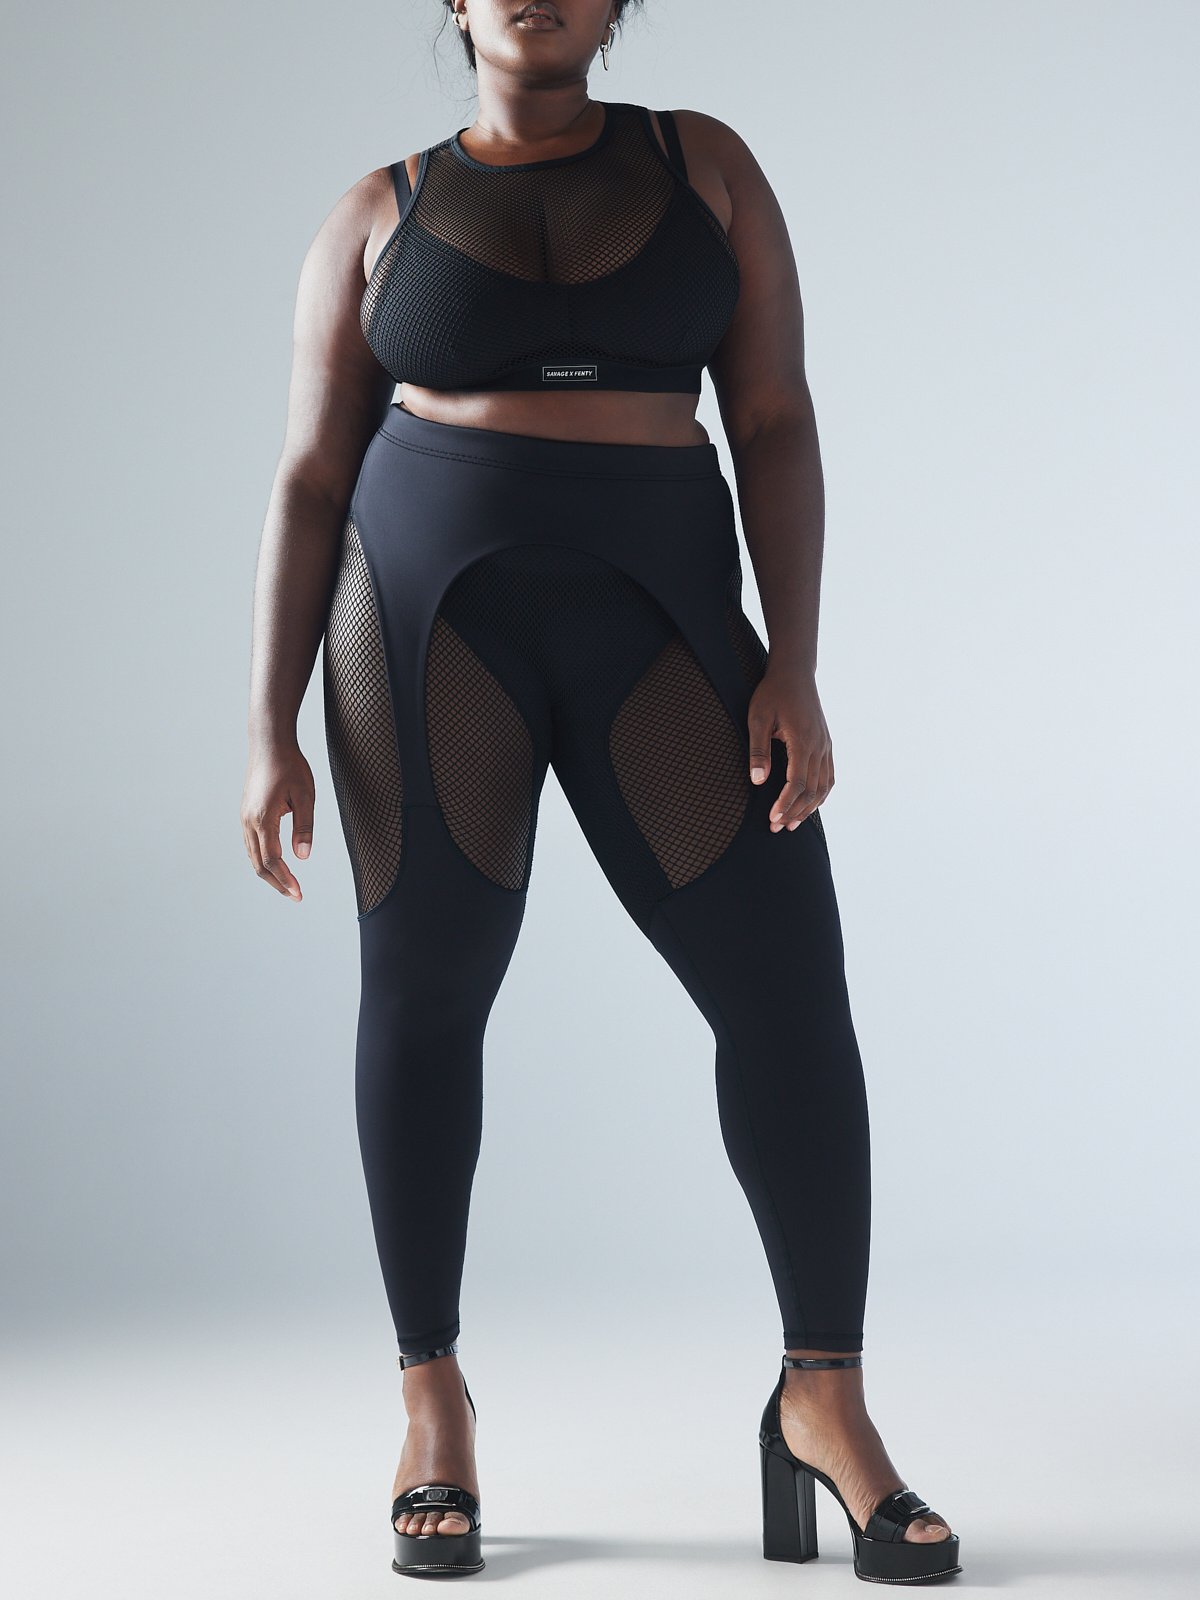 The Hi Fashion site - Best Black Leggings That Are Not See Through